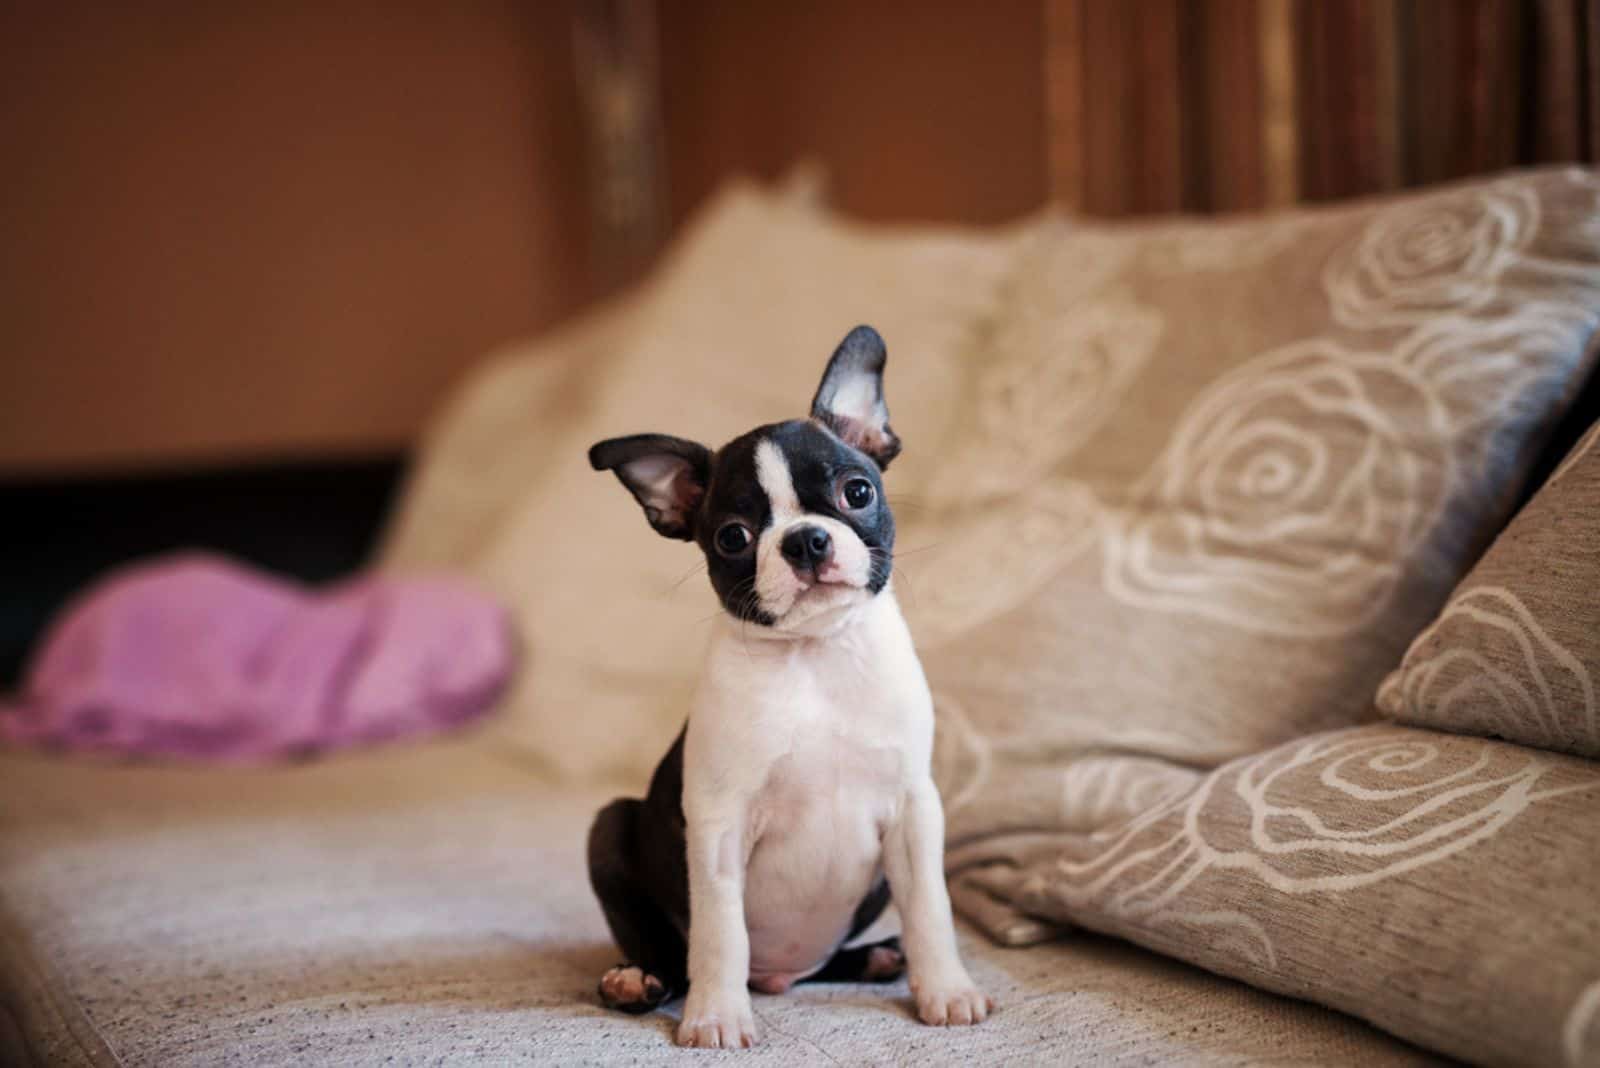 Boston Terrier puppy sitting on the sofa and looking at the camera